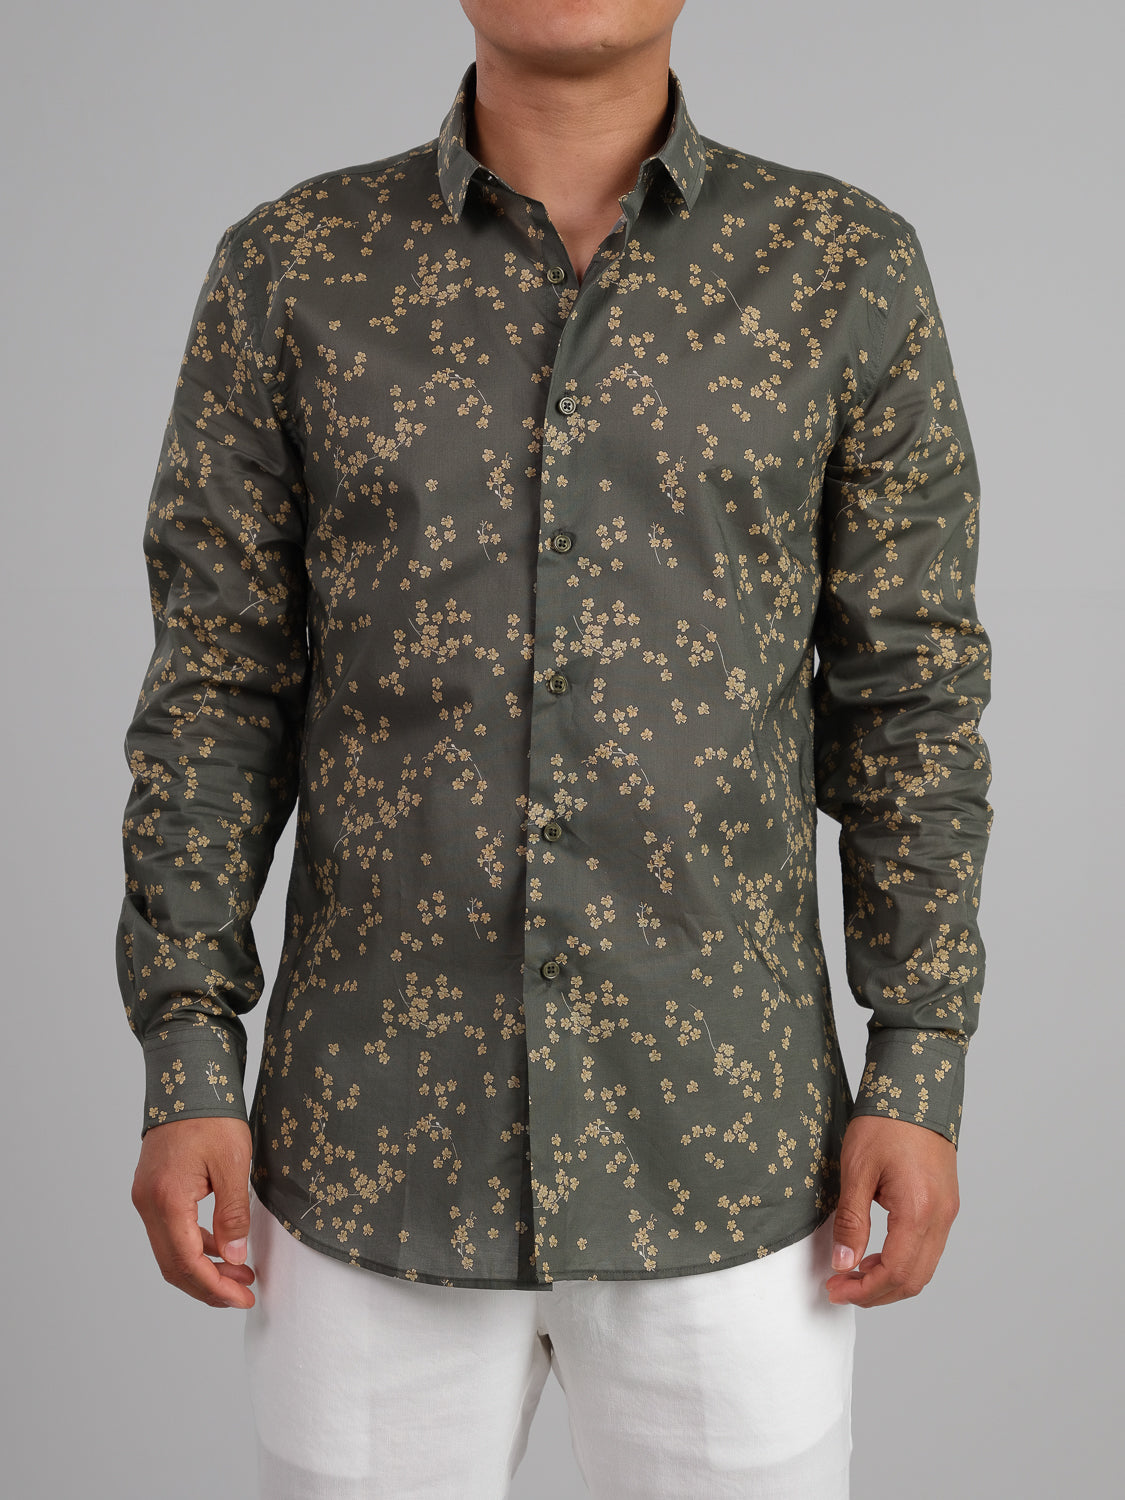 Olive Bloom Long Sleeve 100% Cotton Printed Shirt